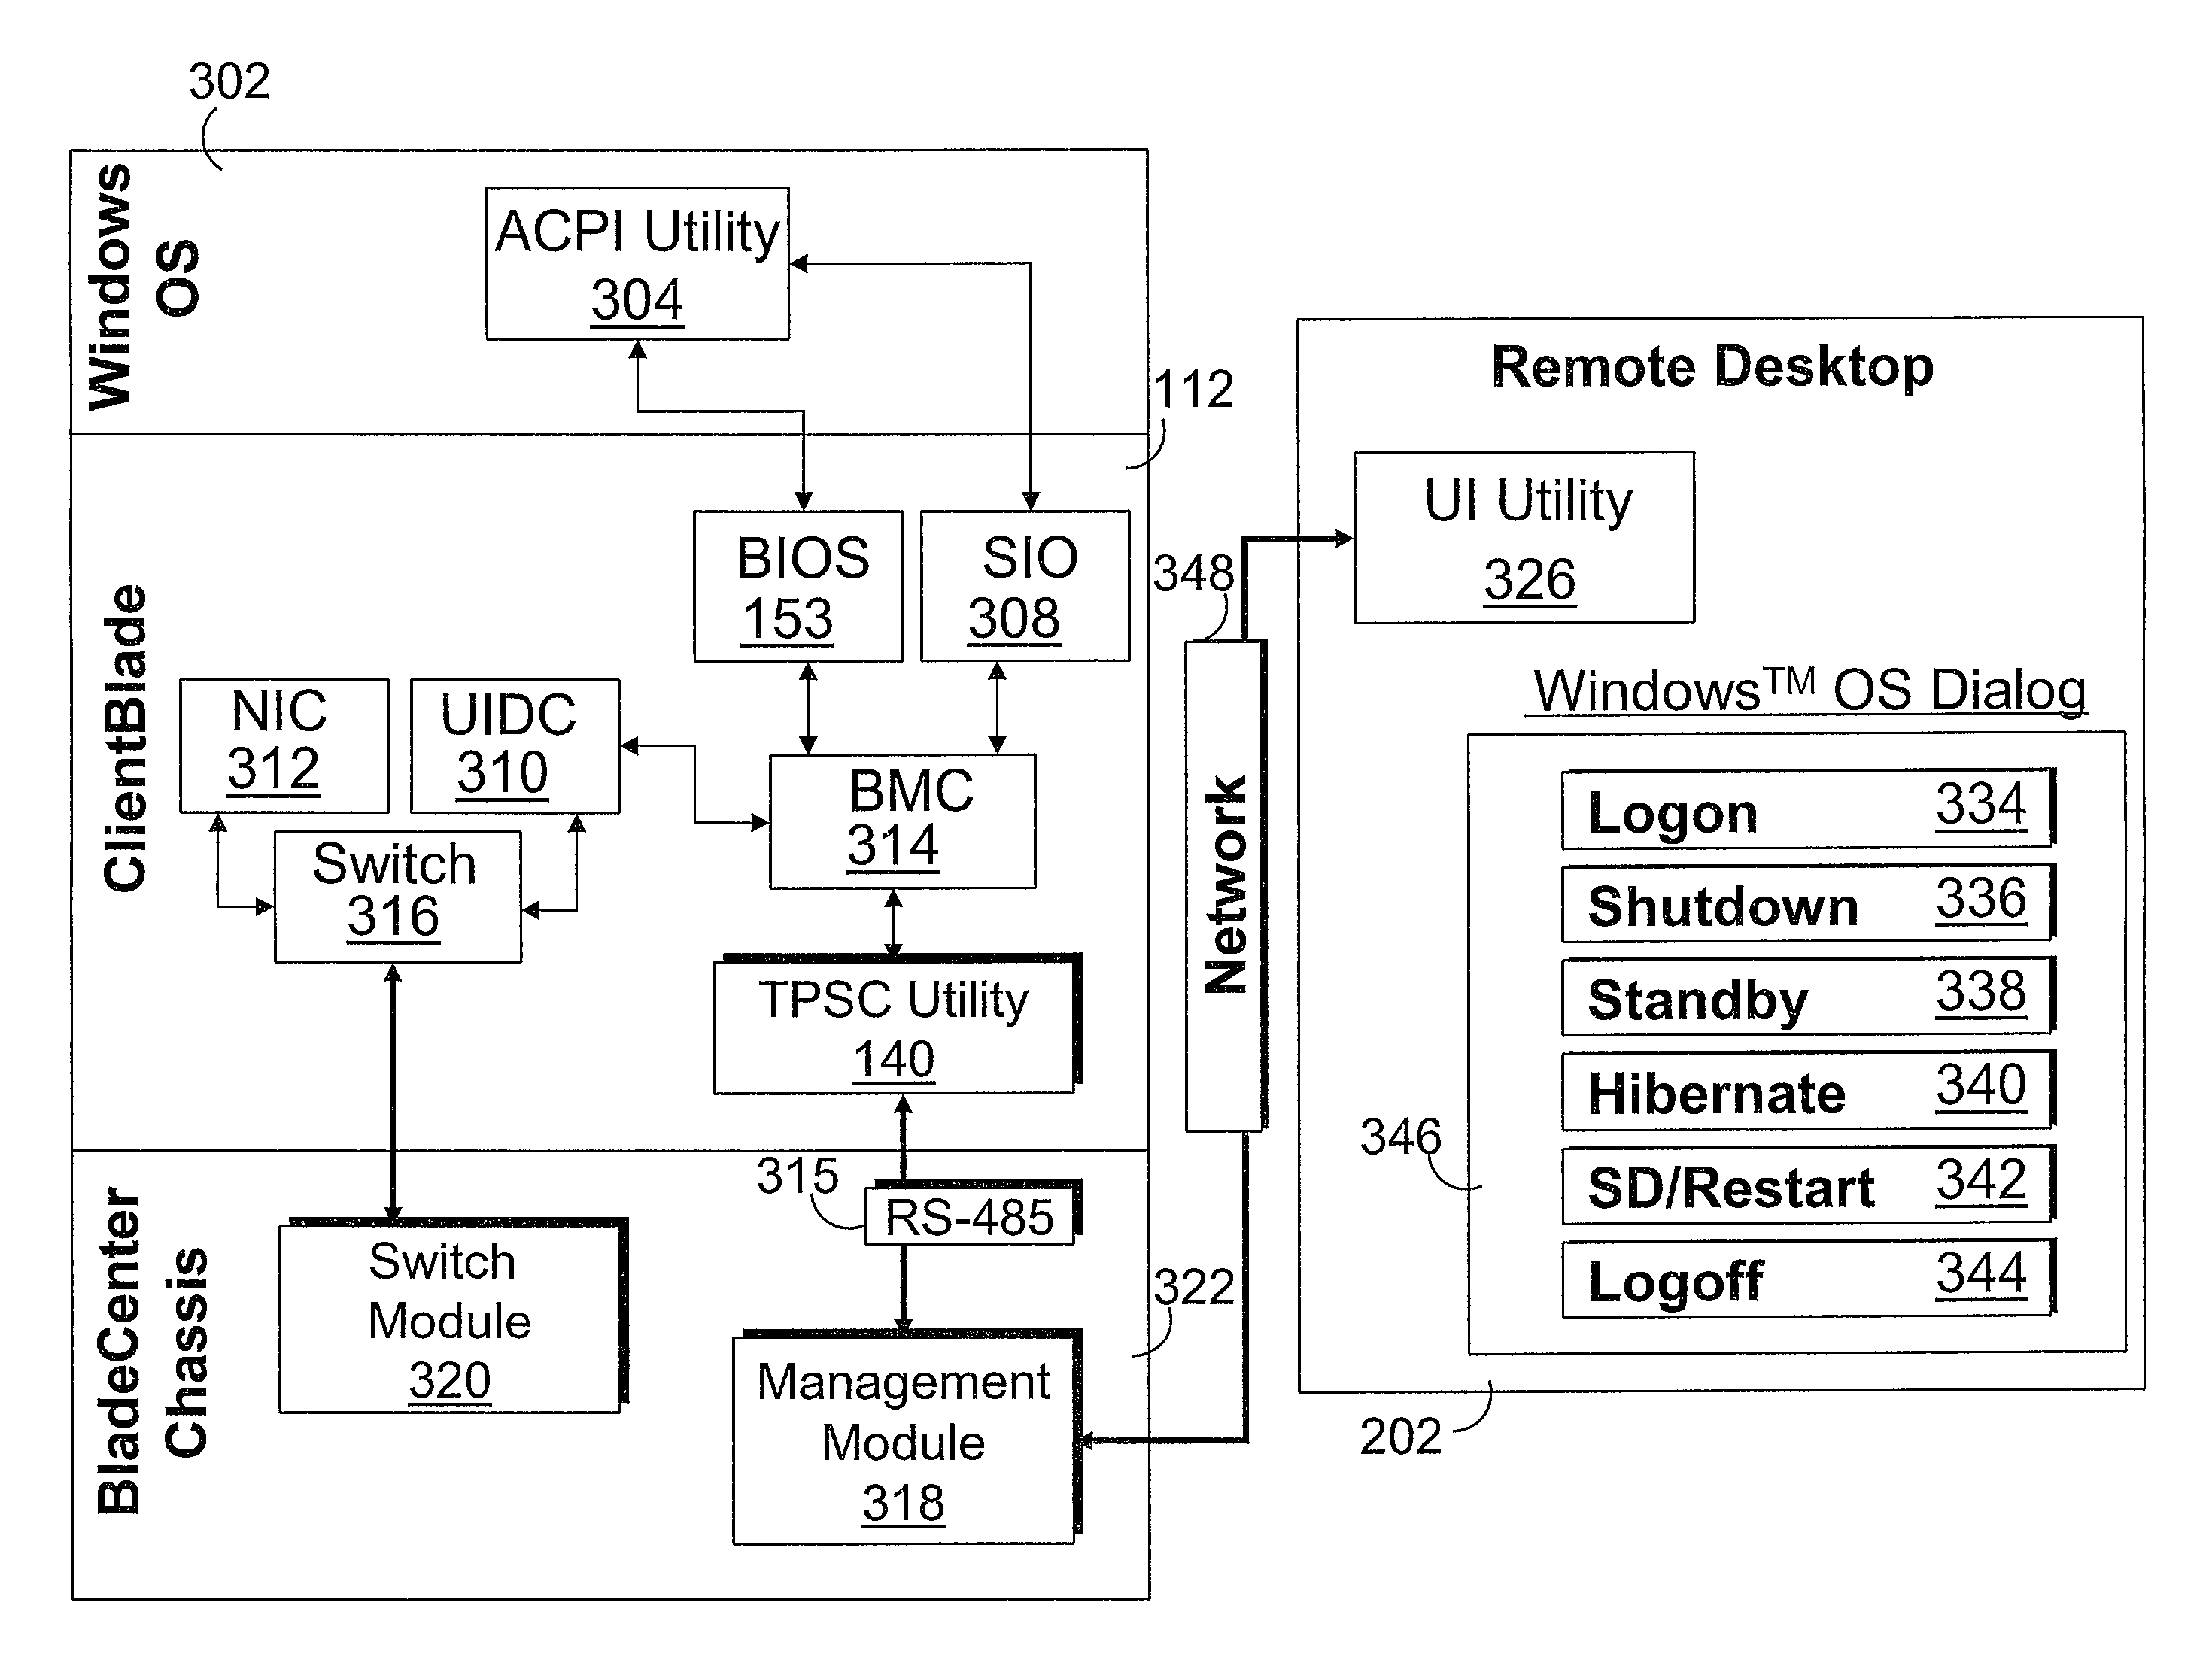 Power state control for a desktop blade in a blade server system